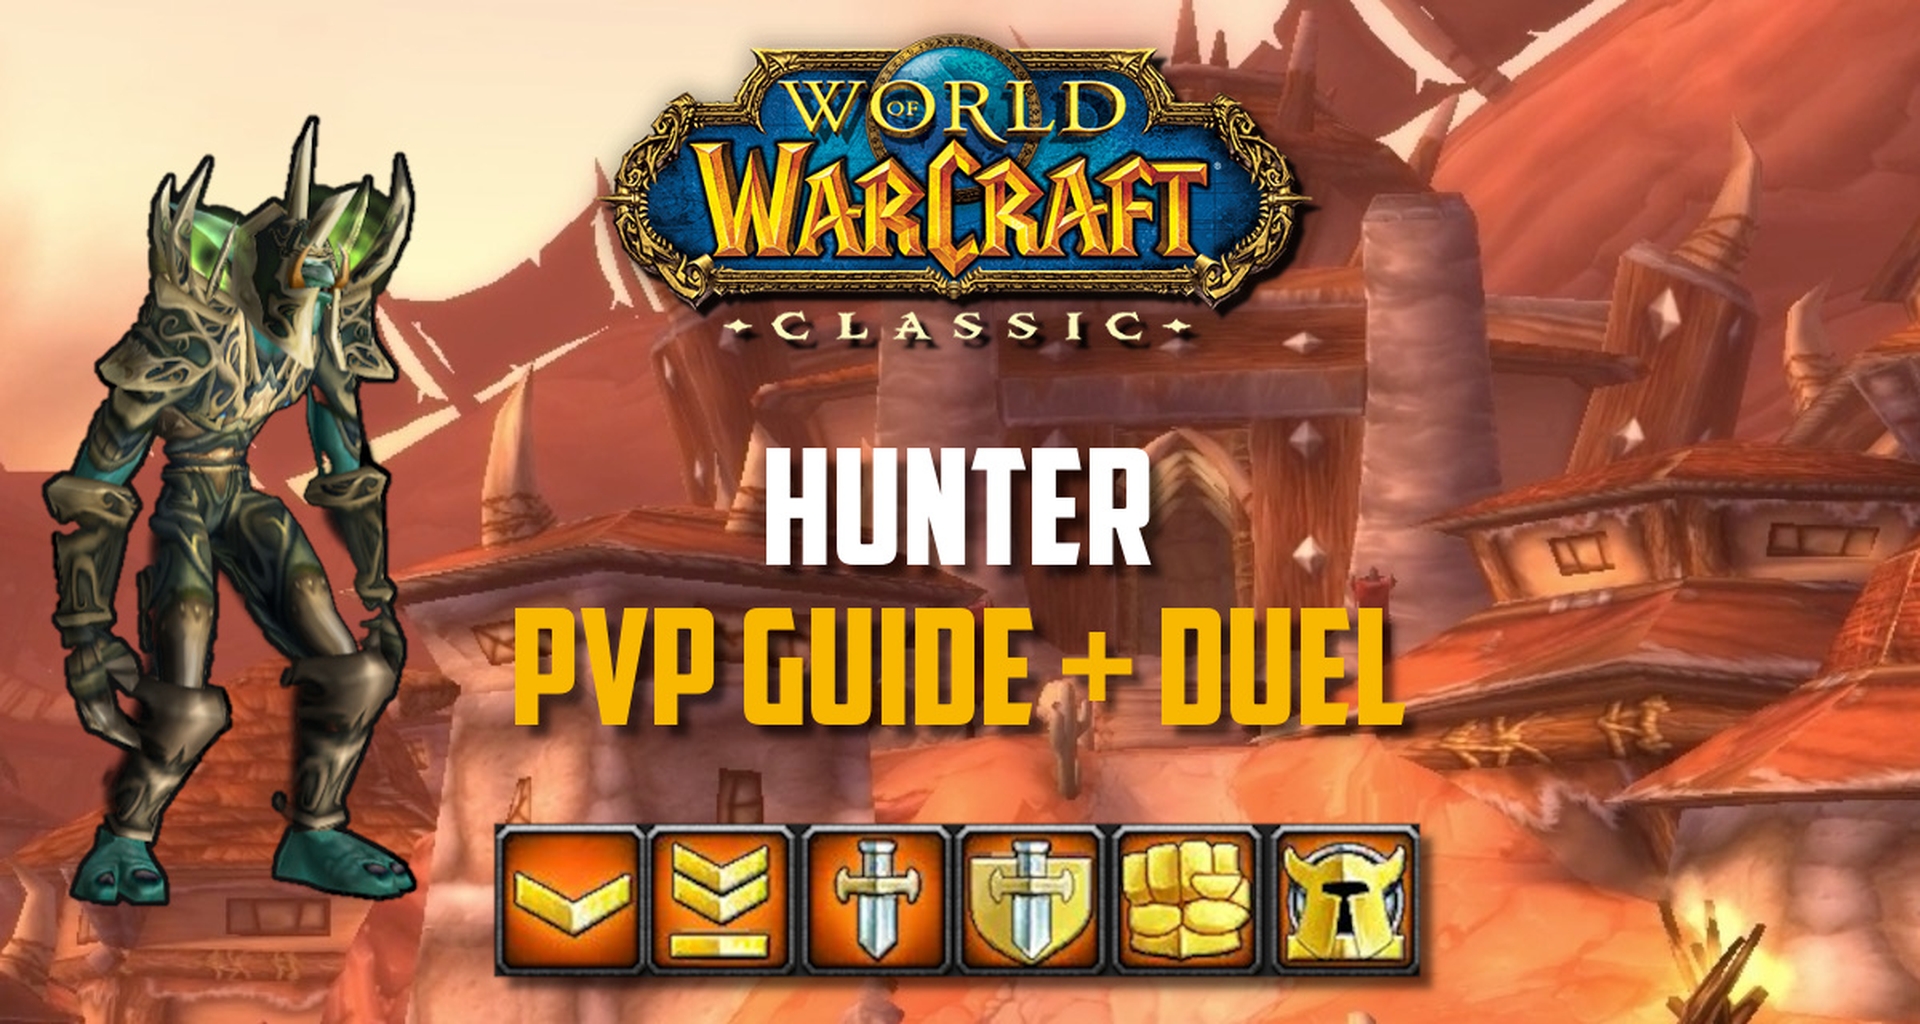 WoW Classic - Hunter PvP Guide - Specs, Duel, BG, Gear.